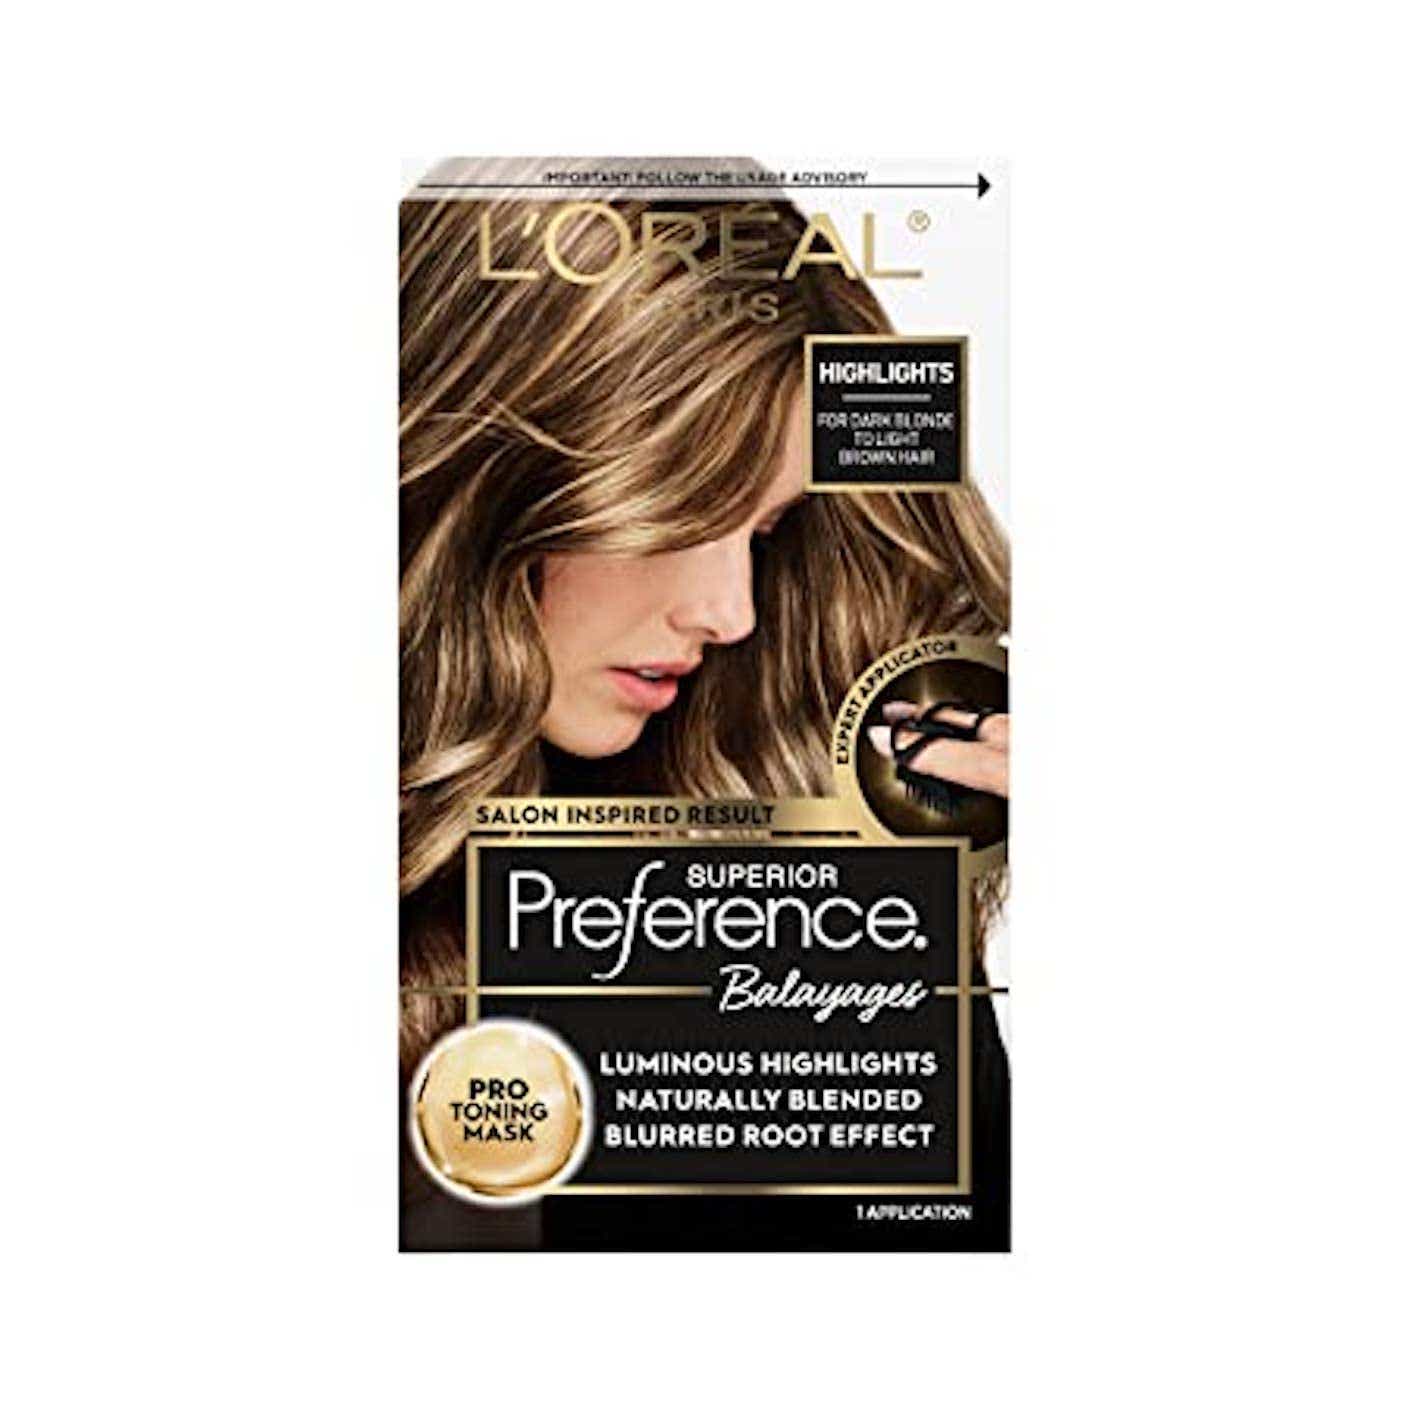 21 Best At-Home Hair Color Brands and Kits of 2022 for a New, Fresh Look —  Editor Reviews